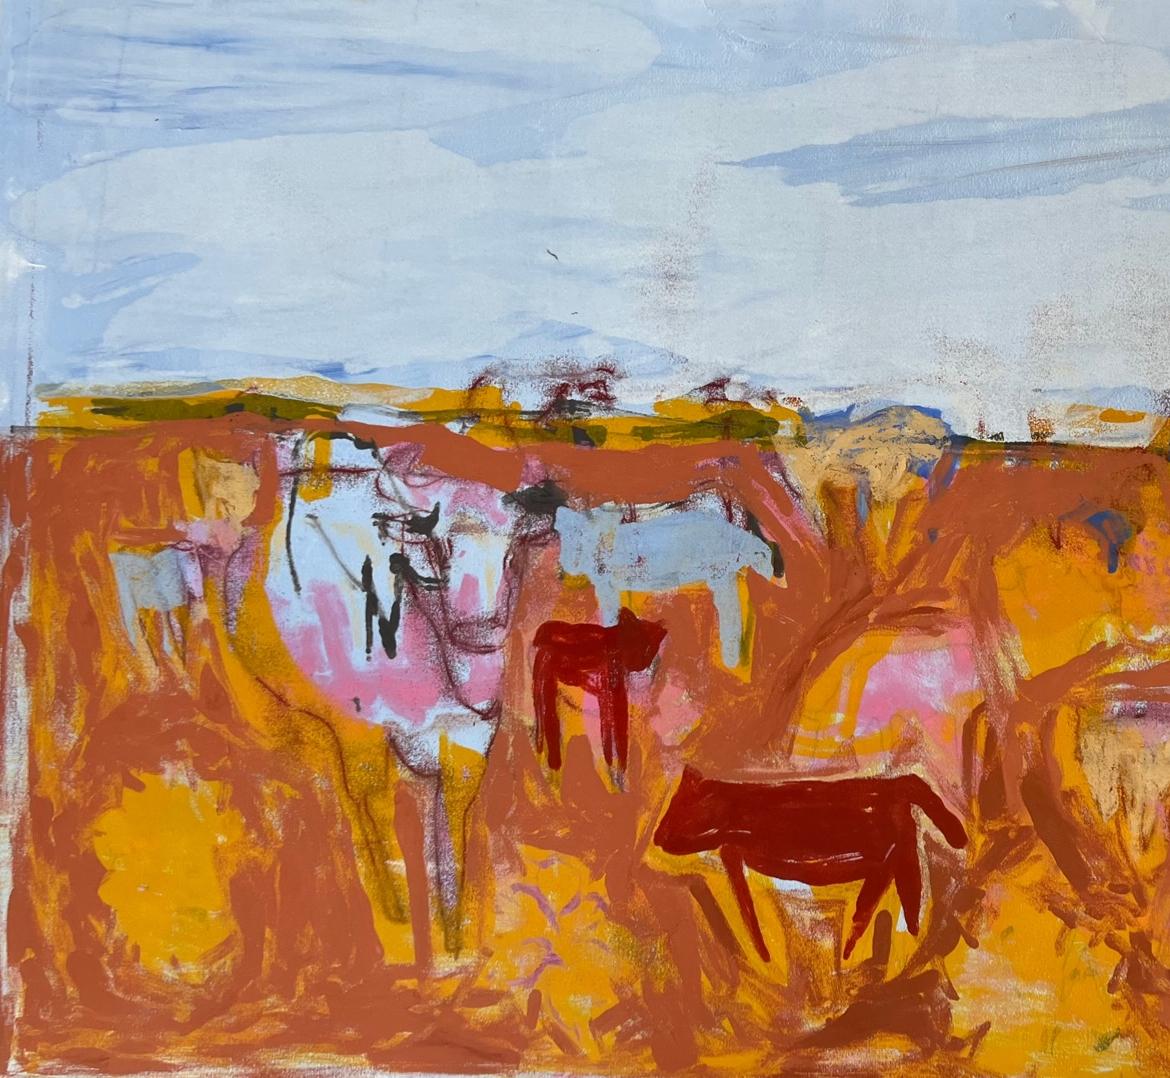 COWS Monotype 31 x 44  Abstract Figurative Art   Framed 37 x 50  Cattle - Abstract Expressionist Mixed Media Art by Charlotte Seifert